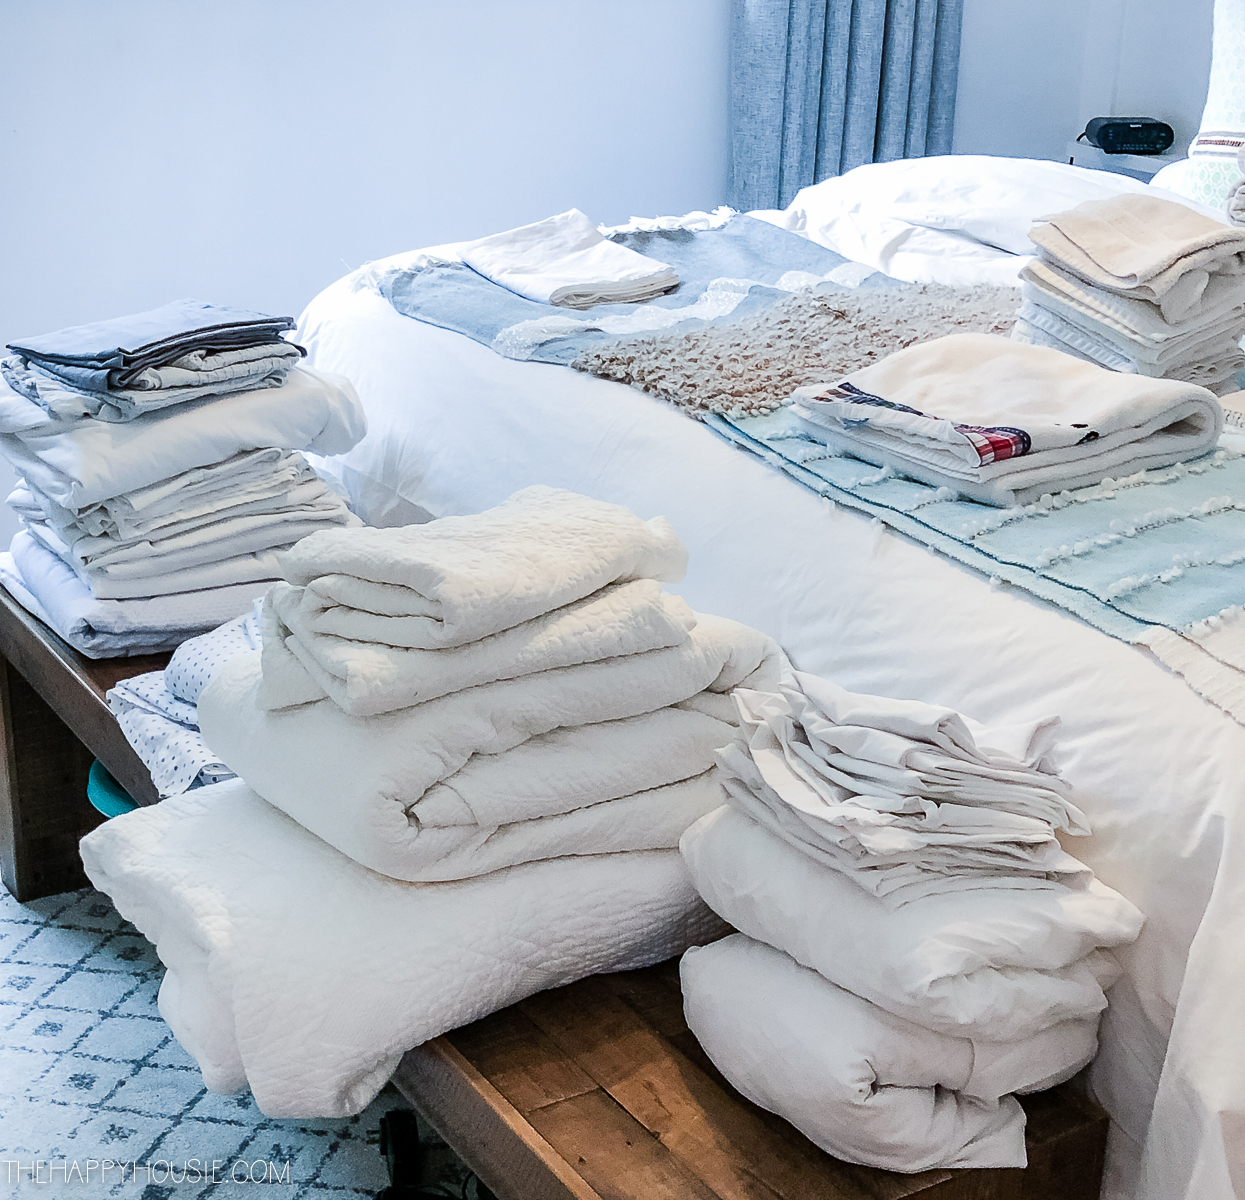 Sorting all the linen in piles on the bed.